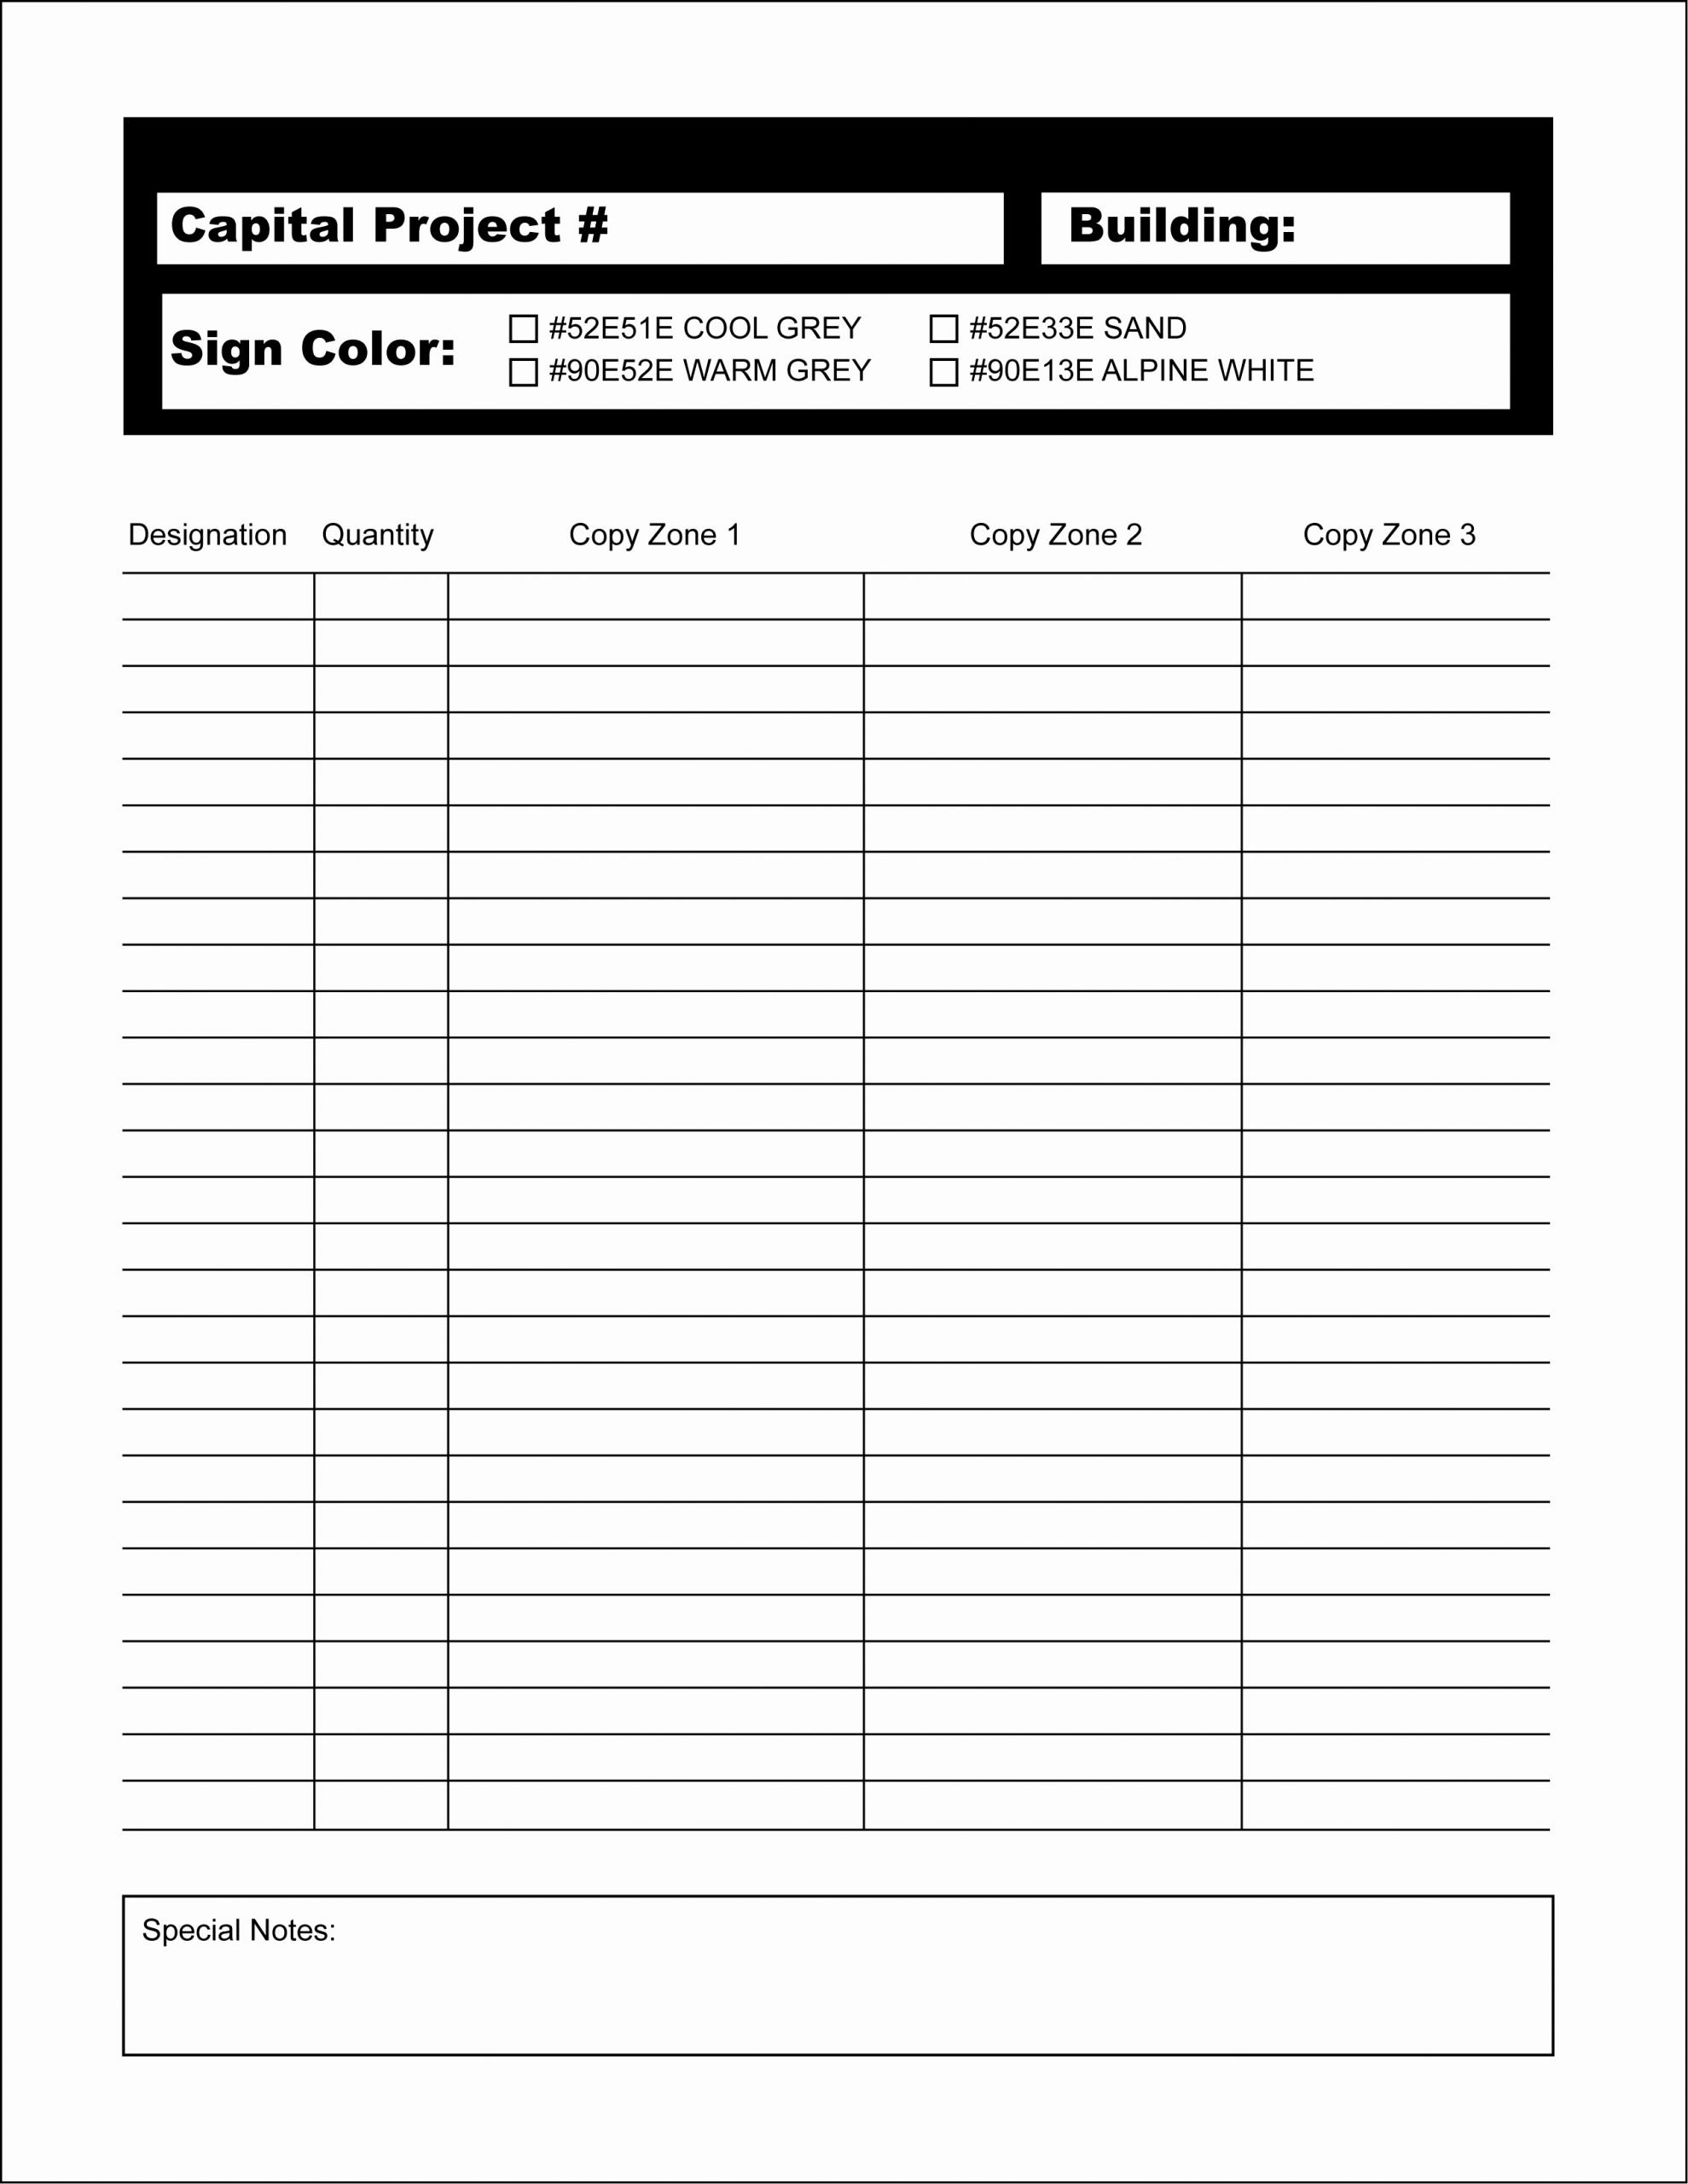 Draw Request form Template Best Of Templates and Signage Design &amp; Construction Standards